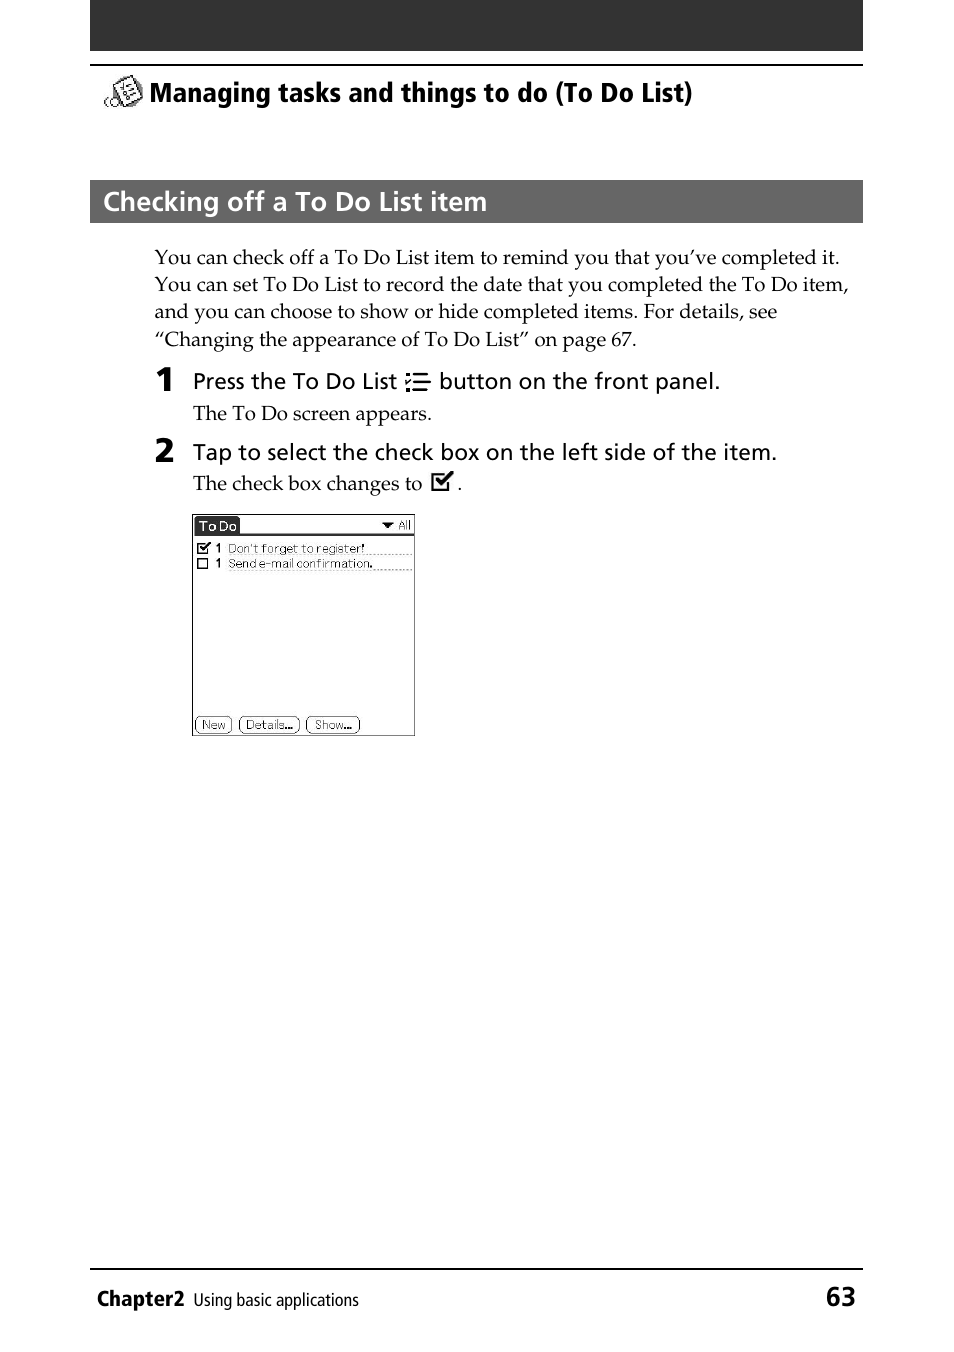 Checking off a to do list item | Sony PEG-T415G User Manual | Page 63 / 220